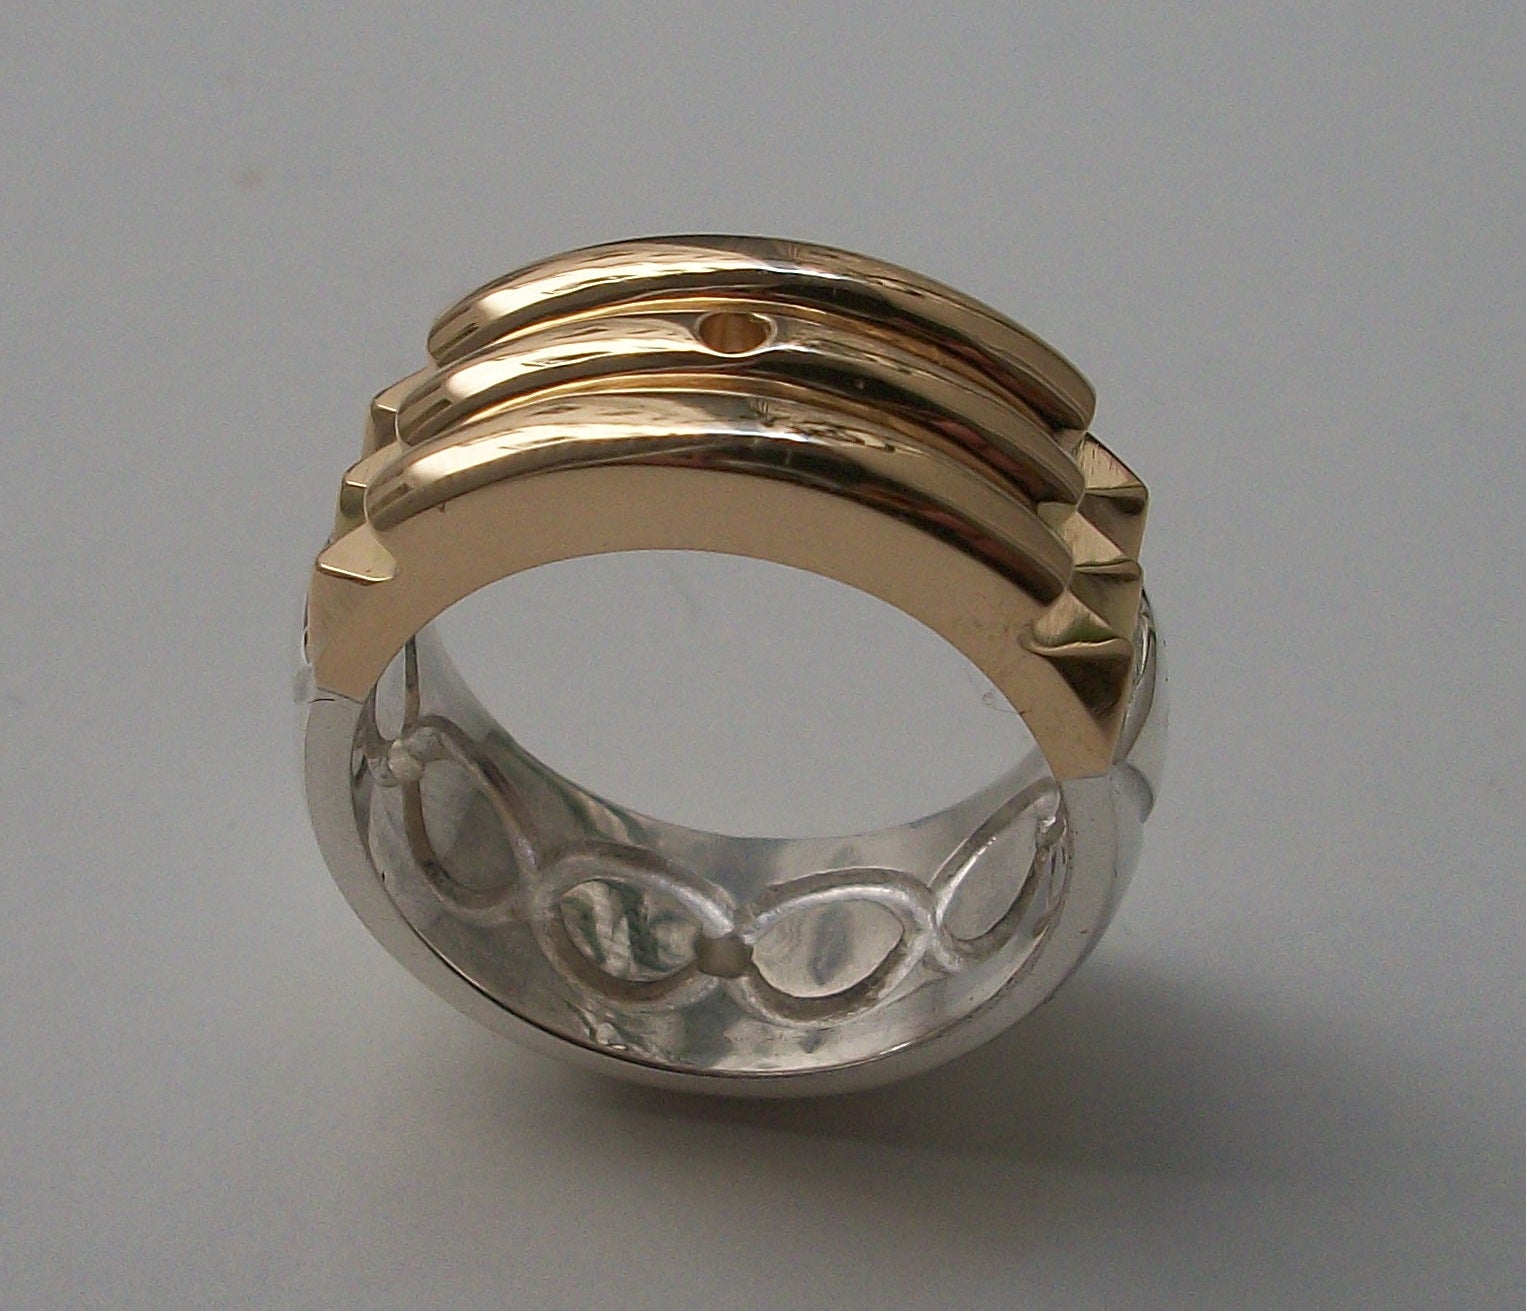 Atlantis ring - 18K Solid Gold Upper Area & 925 Sterling Silver Lower Area - ALL SIZES